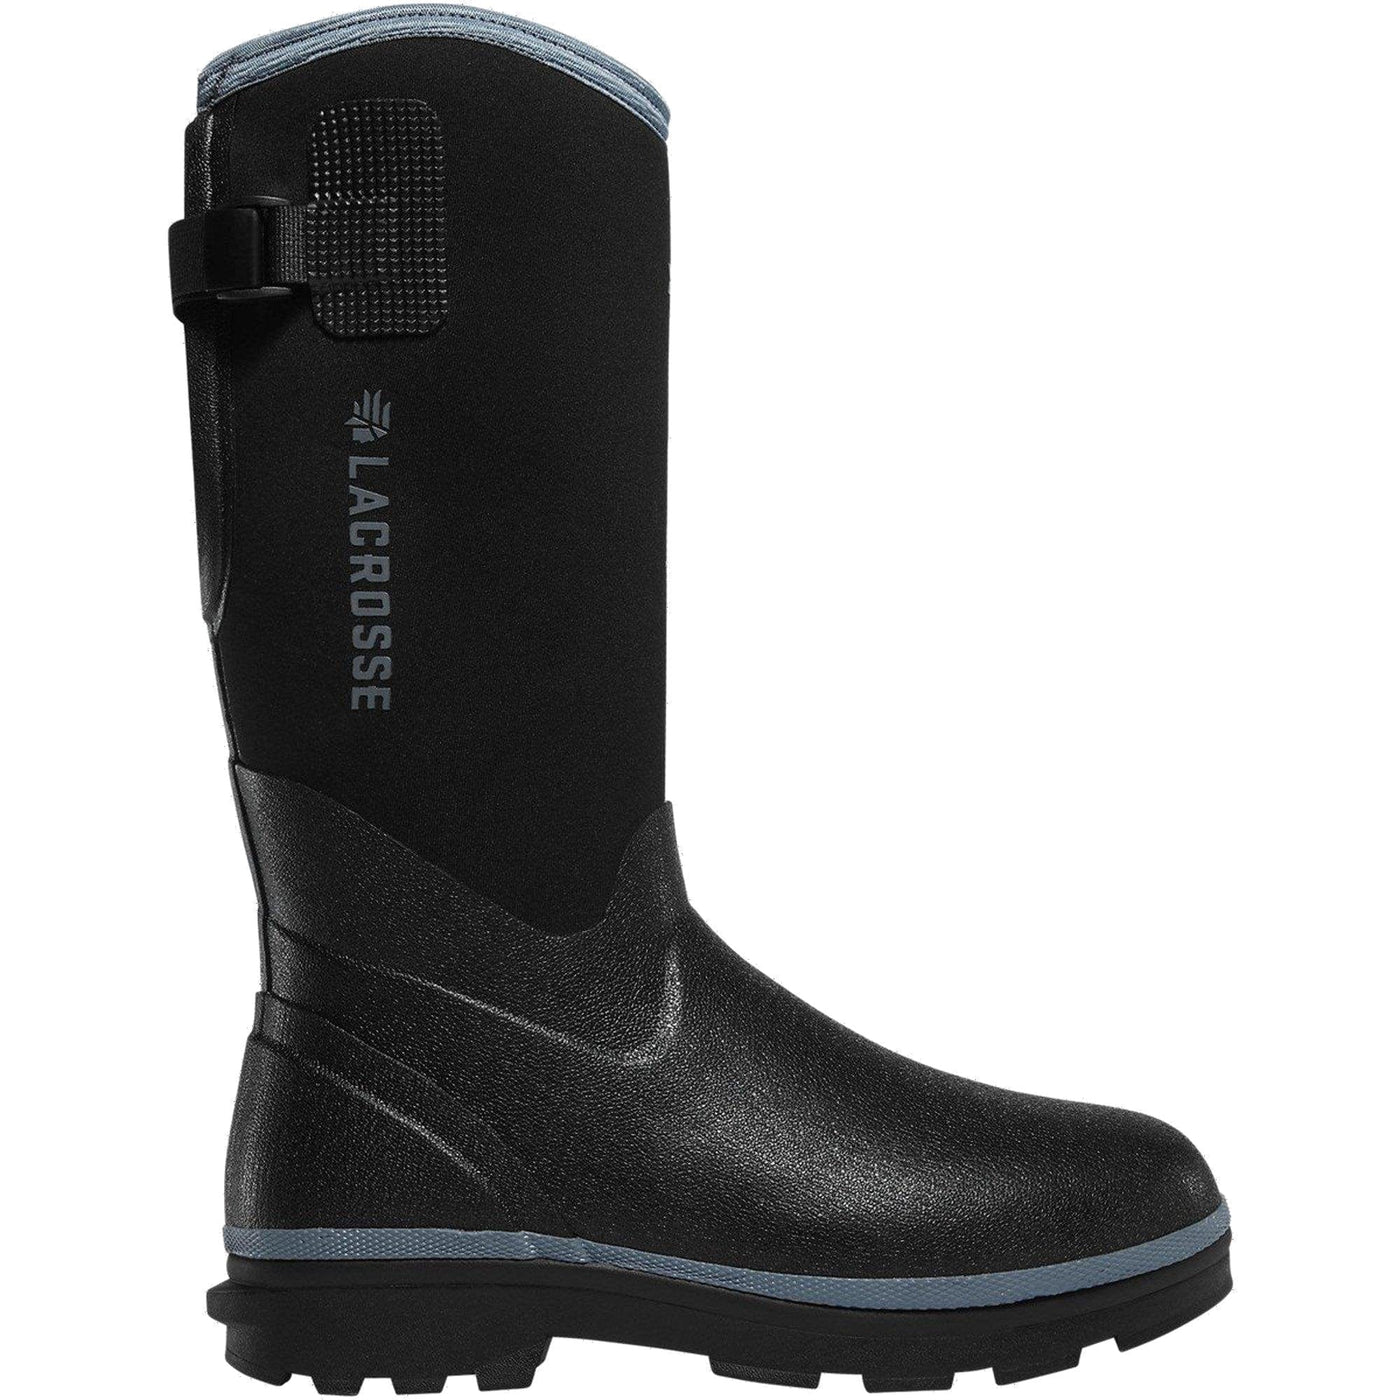 Lacrosse-Womens-Alpha-Range-12-5.0MM-black-cerulean-insulated-boots